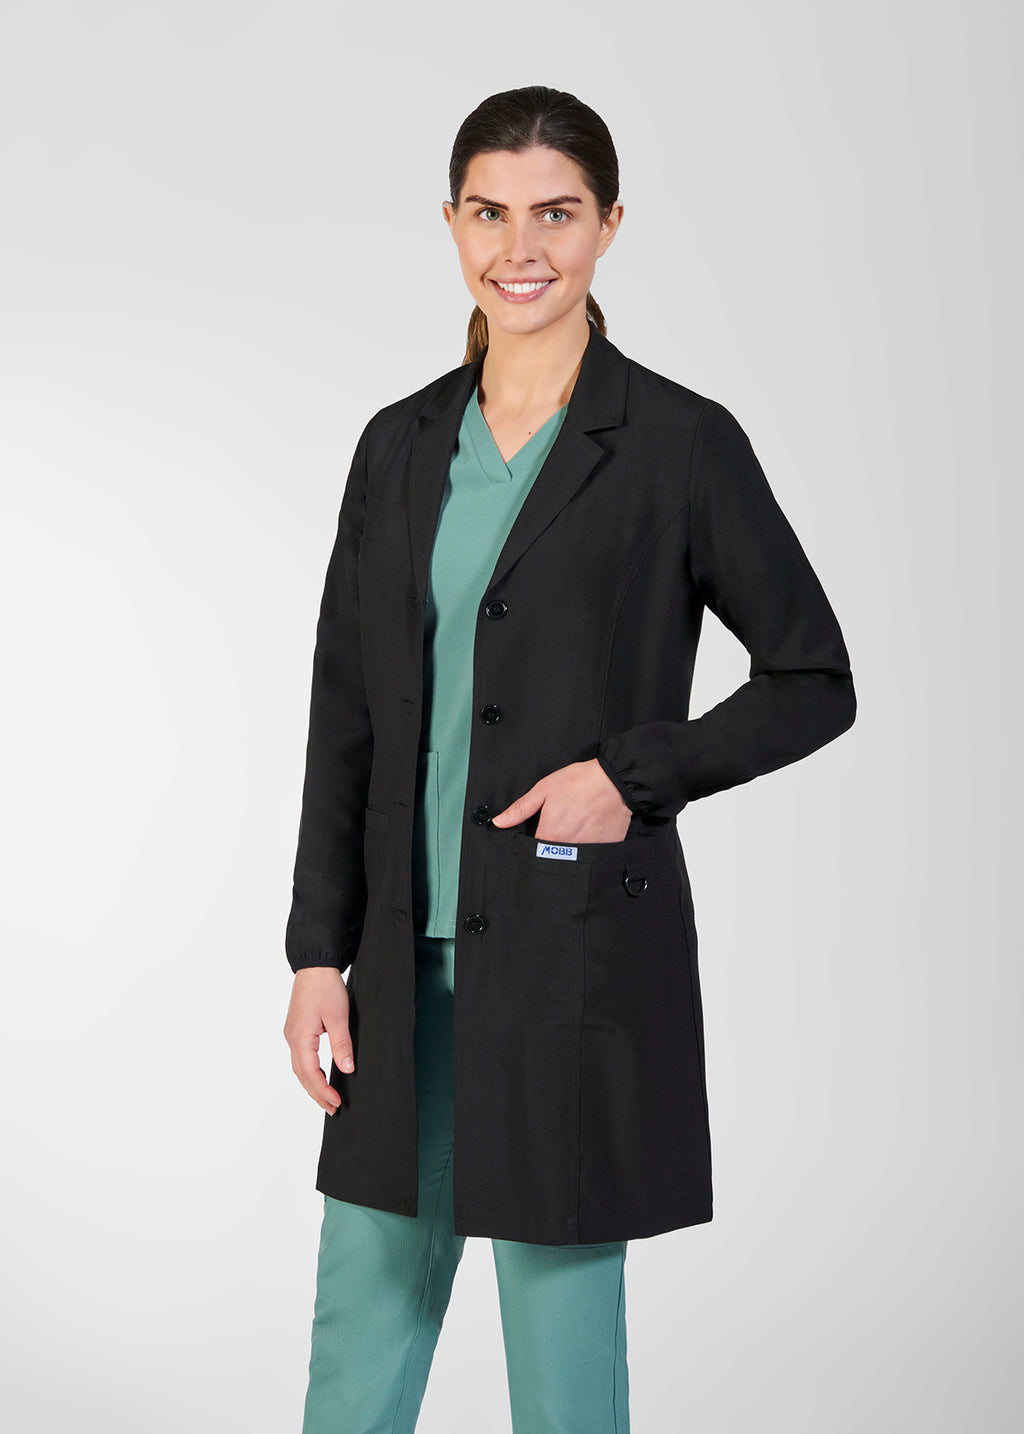 Product - The Marie Ladies Fitted Lab Coat by MOBB